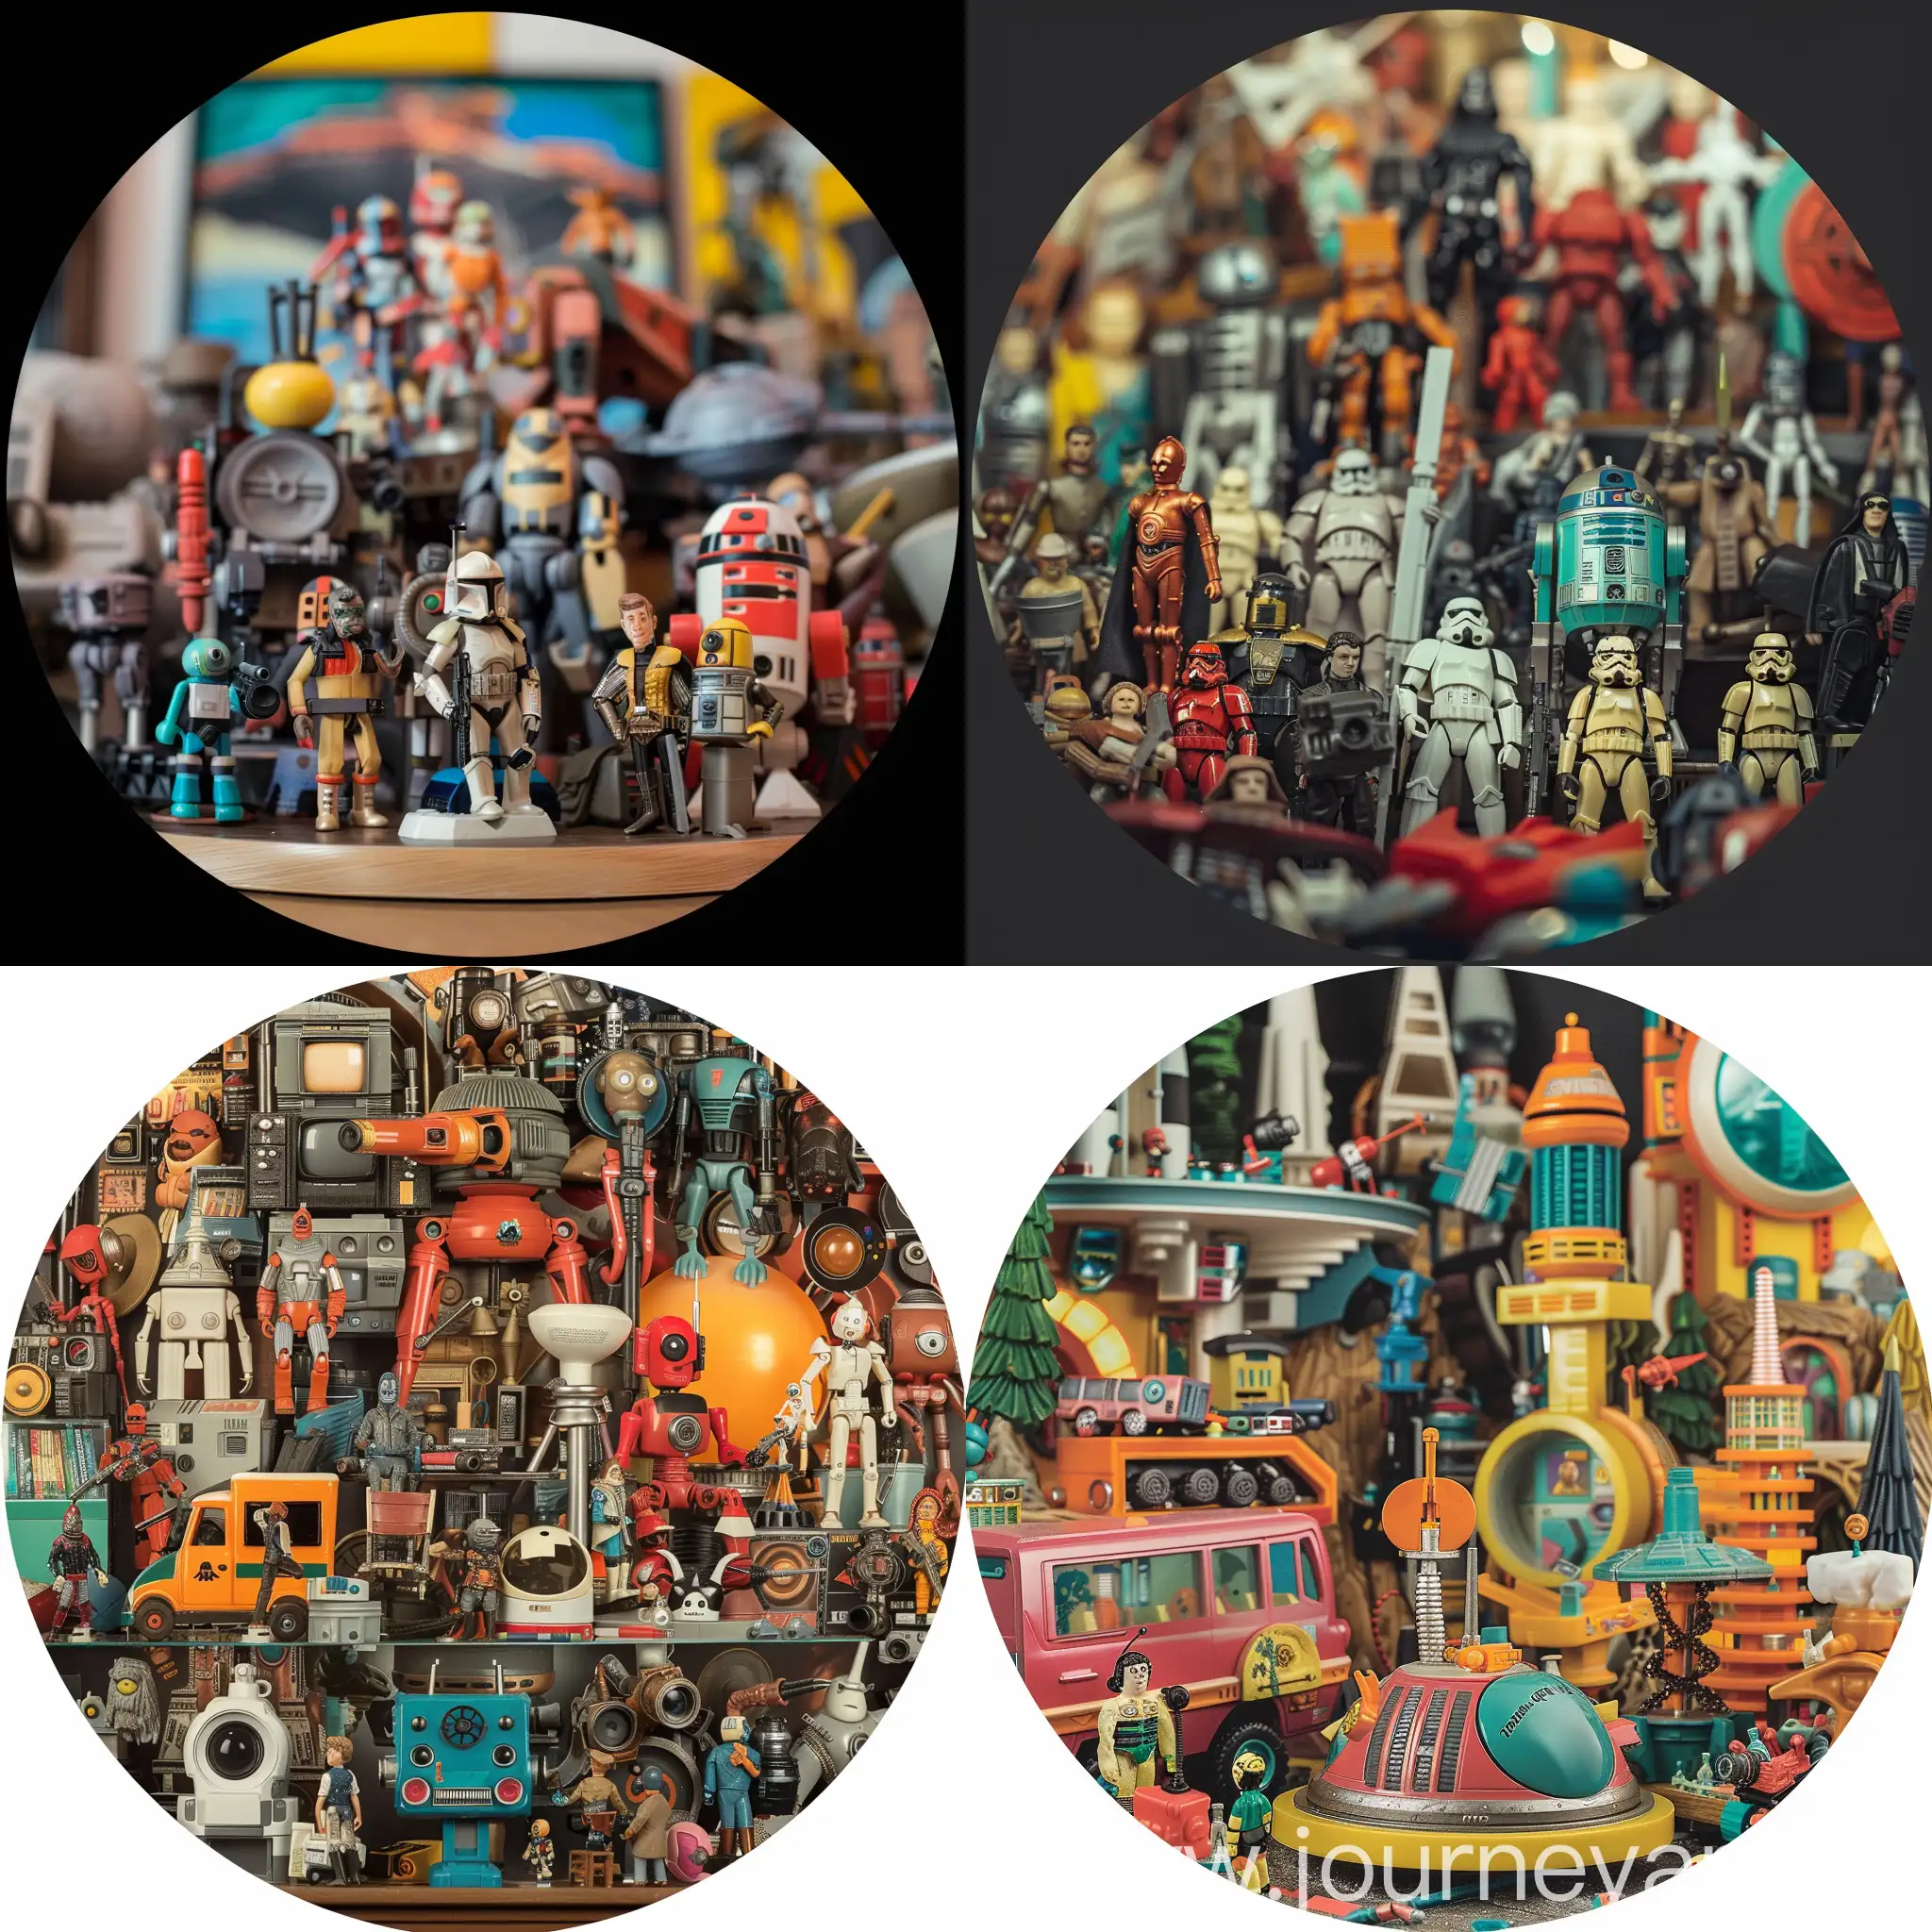 Circular-Toy-Collector-Profile-Picture-with-Video-Thematic-Background